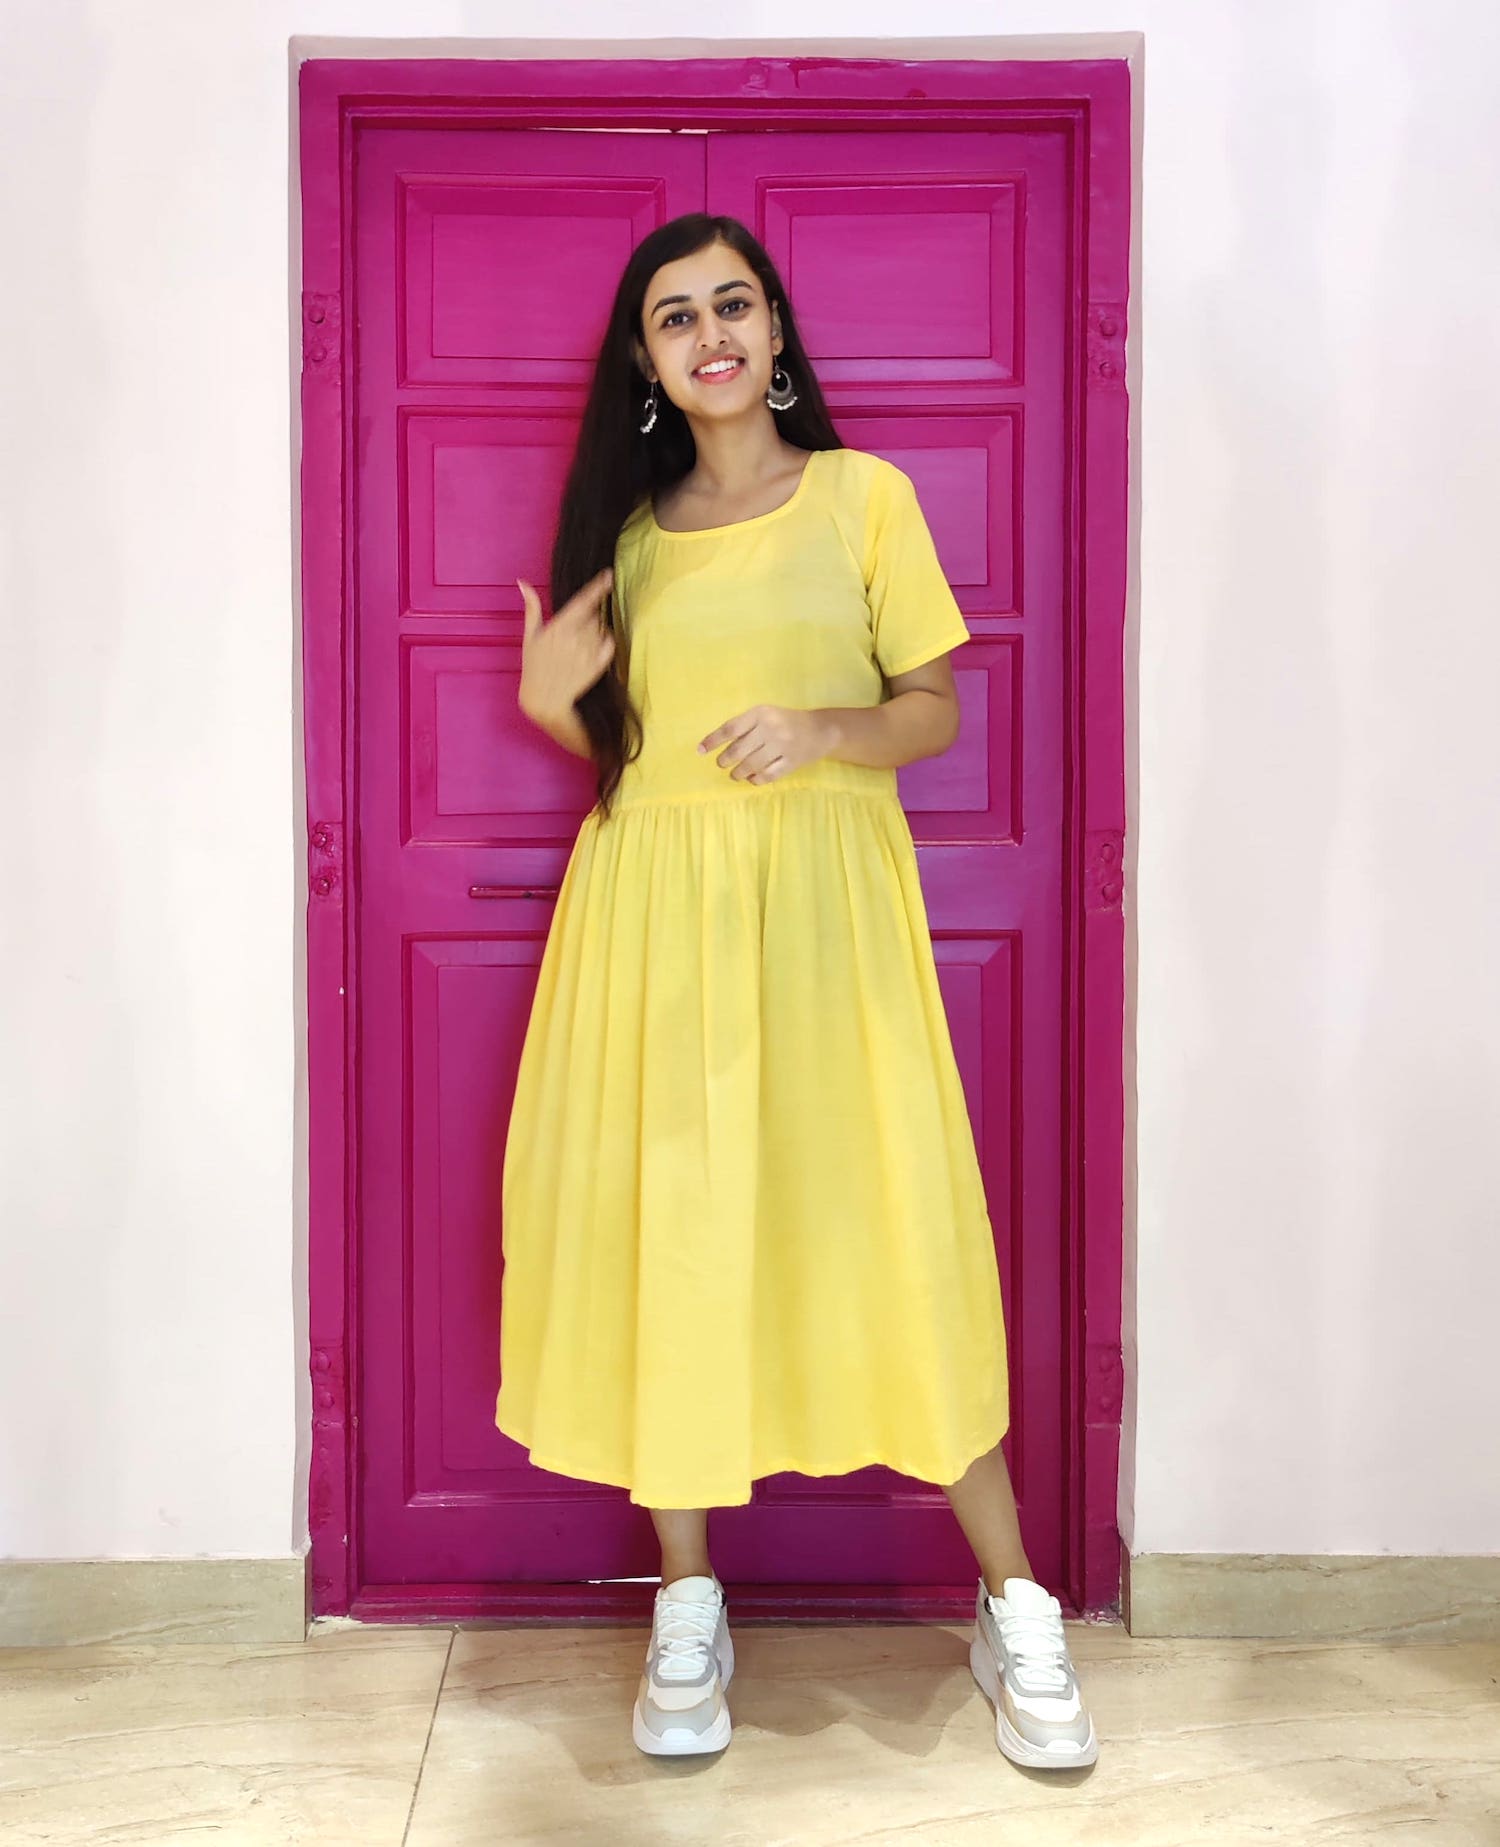 Cute Cotton Lancha Dress For Women Puffy Short Sleeve Belt, Mini Shirt,  Bright Yellow And Pink Perfect For Parties, Birthdays, And Clubs Available  In 4XL From Blueberry15, $24.89 | DHgate.Com